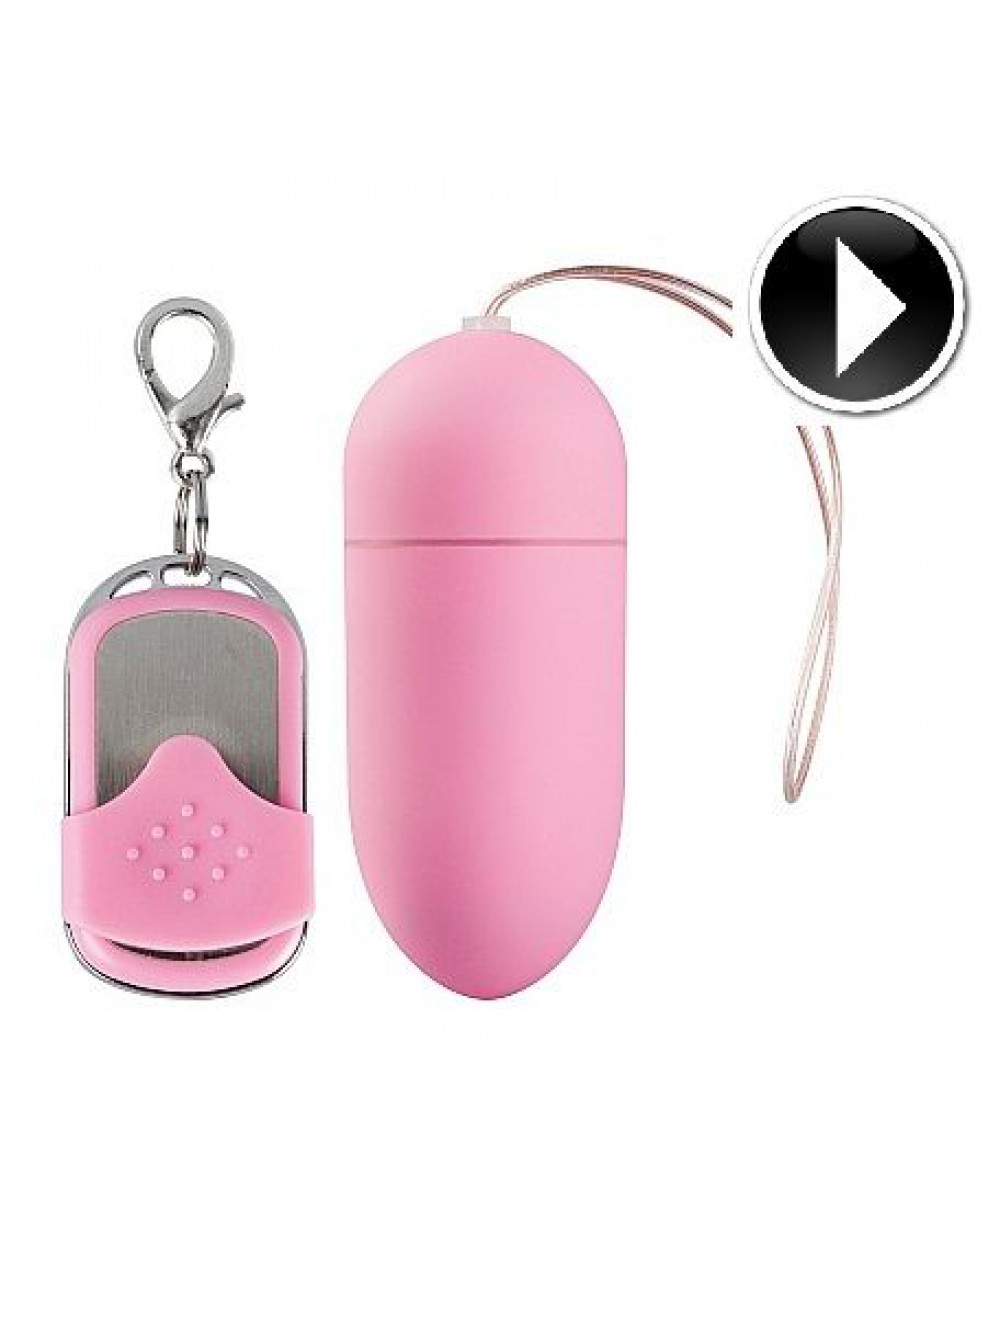 VIBRATING EGG LARGE 10 SPEED REMOTE CONTROLLED PINK